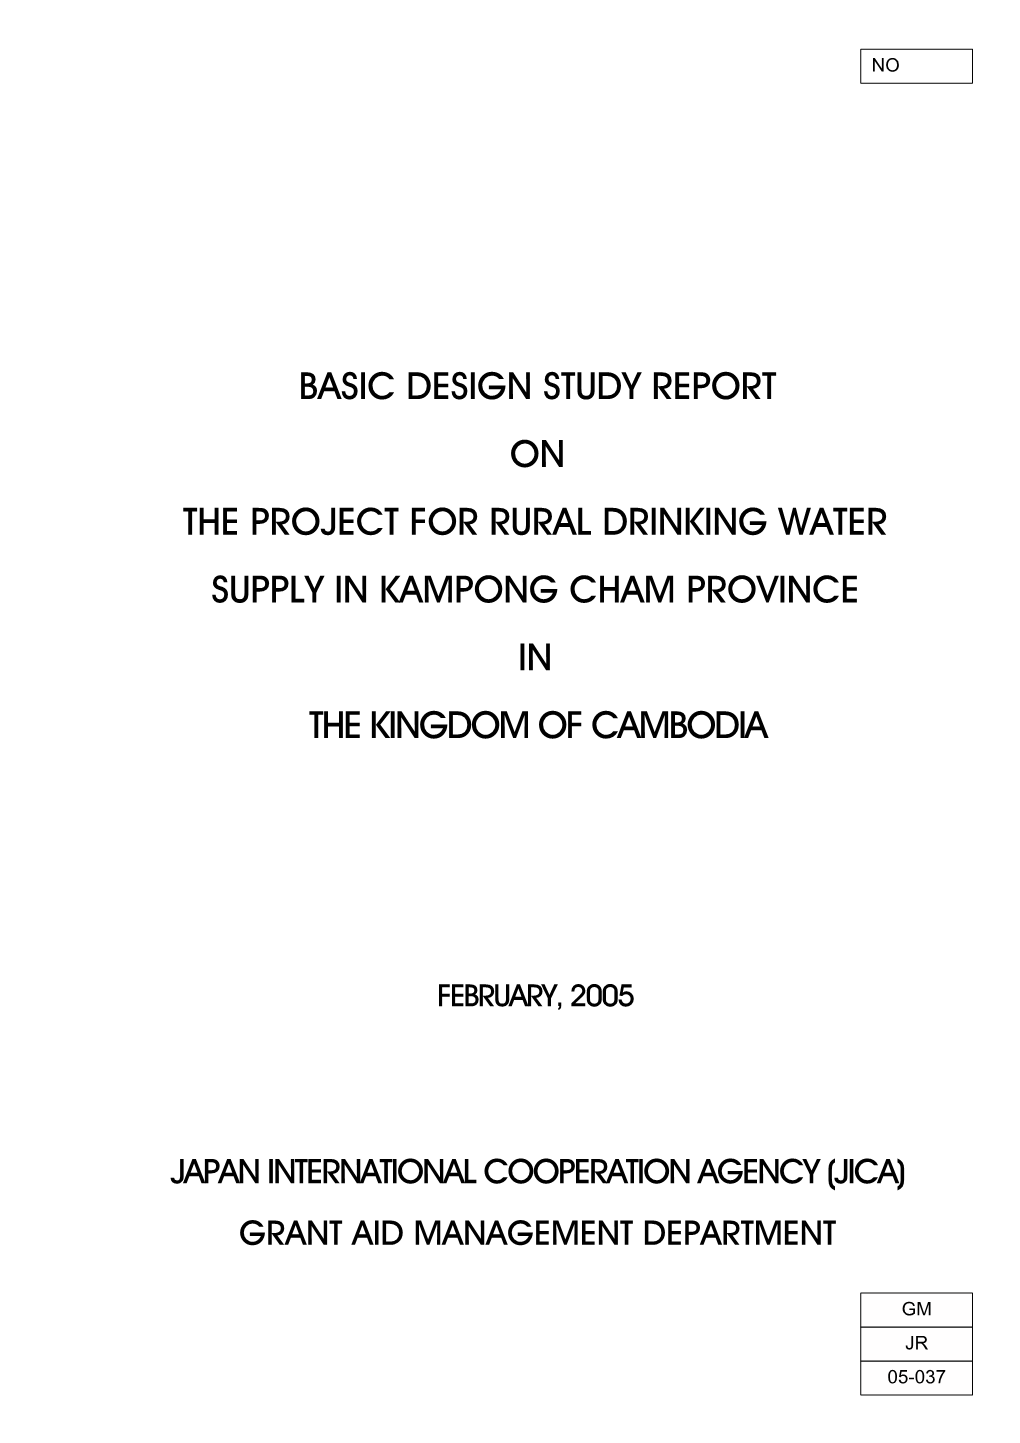 Basic Design Study Report on the Project for Rural Drinking Water Supply in Kampong Cham Province in the Kingdom of Cambodia